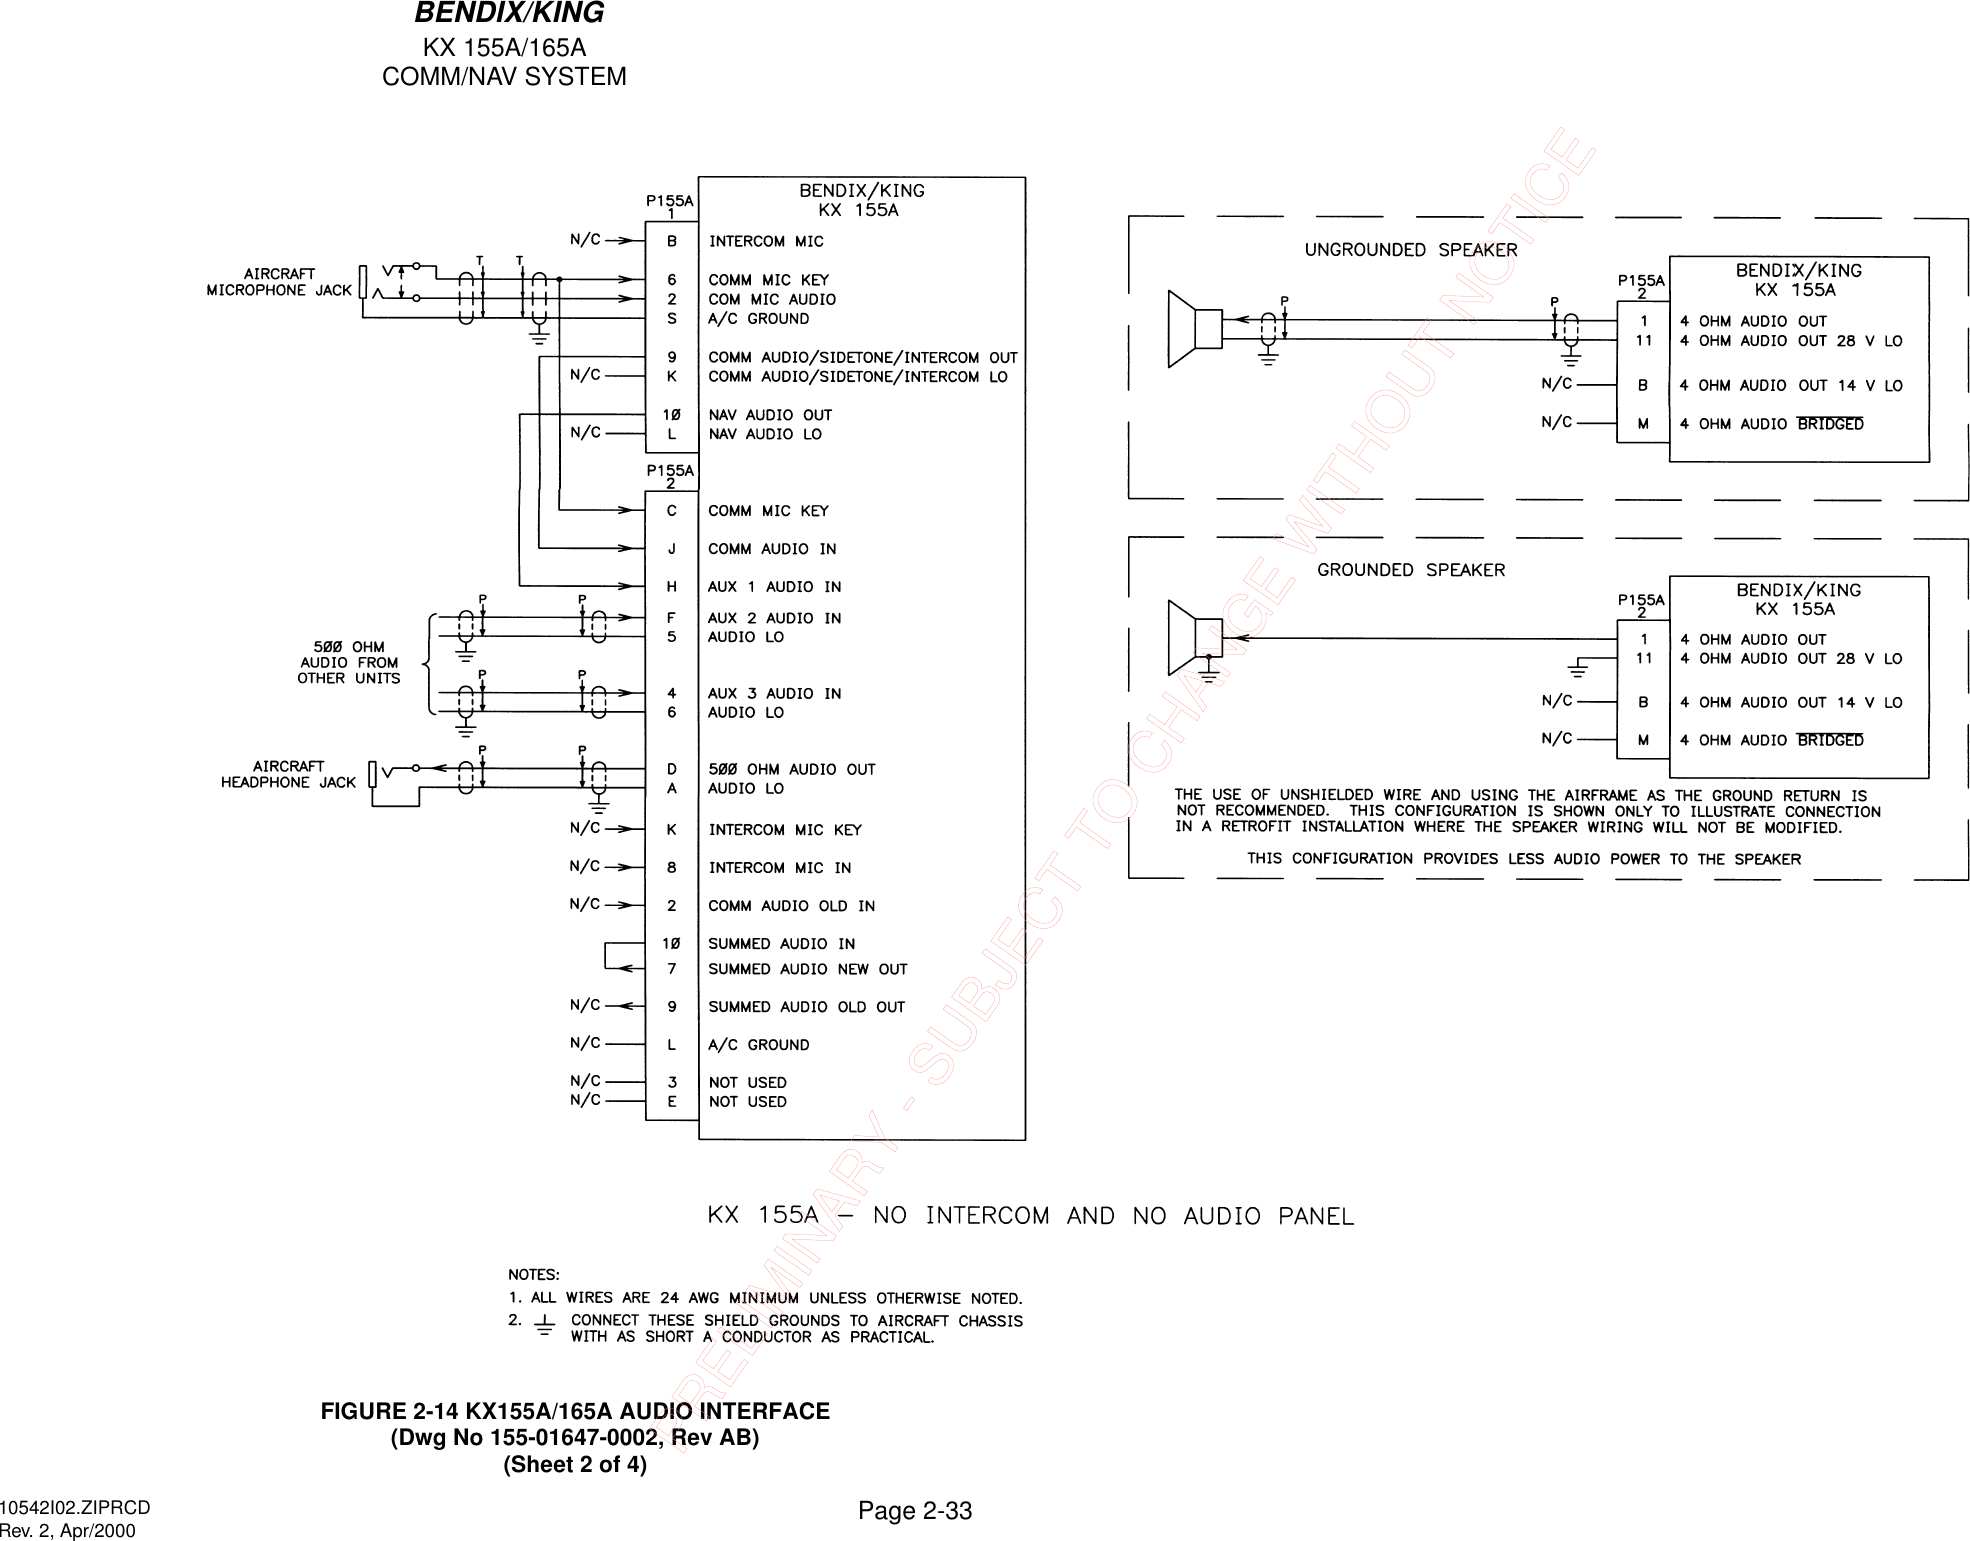 KX 155A/165ACOMM/NAV SYSTEMPage 2-33BENDIX/KING10542I02.ZIPRCDRev. 2, Apr/2000FIGURE 2-14 KX155A/165A AUDIO INTERFACE(Dwg No 155-01647-0002, Rev AB)(Sheet 2 of 4)PRELIMINARY - SUBJECT TO CHANGE WITHOUT NOTICE